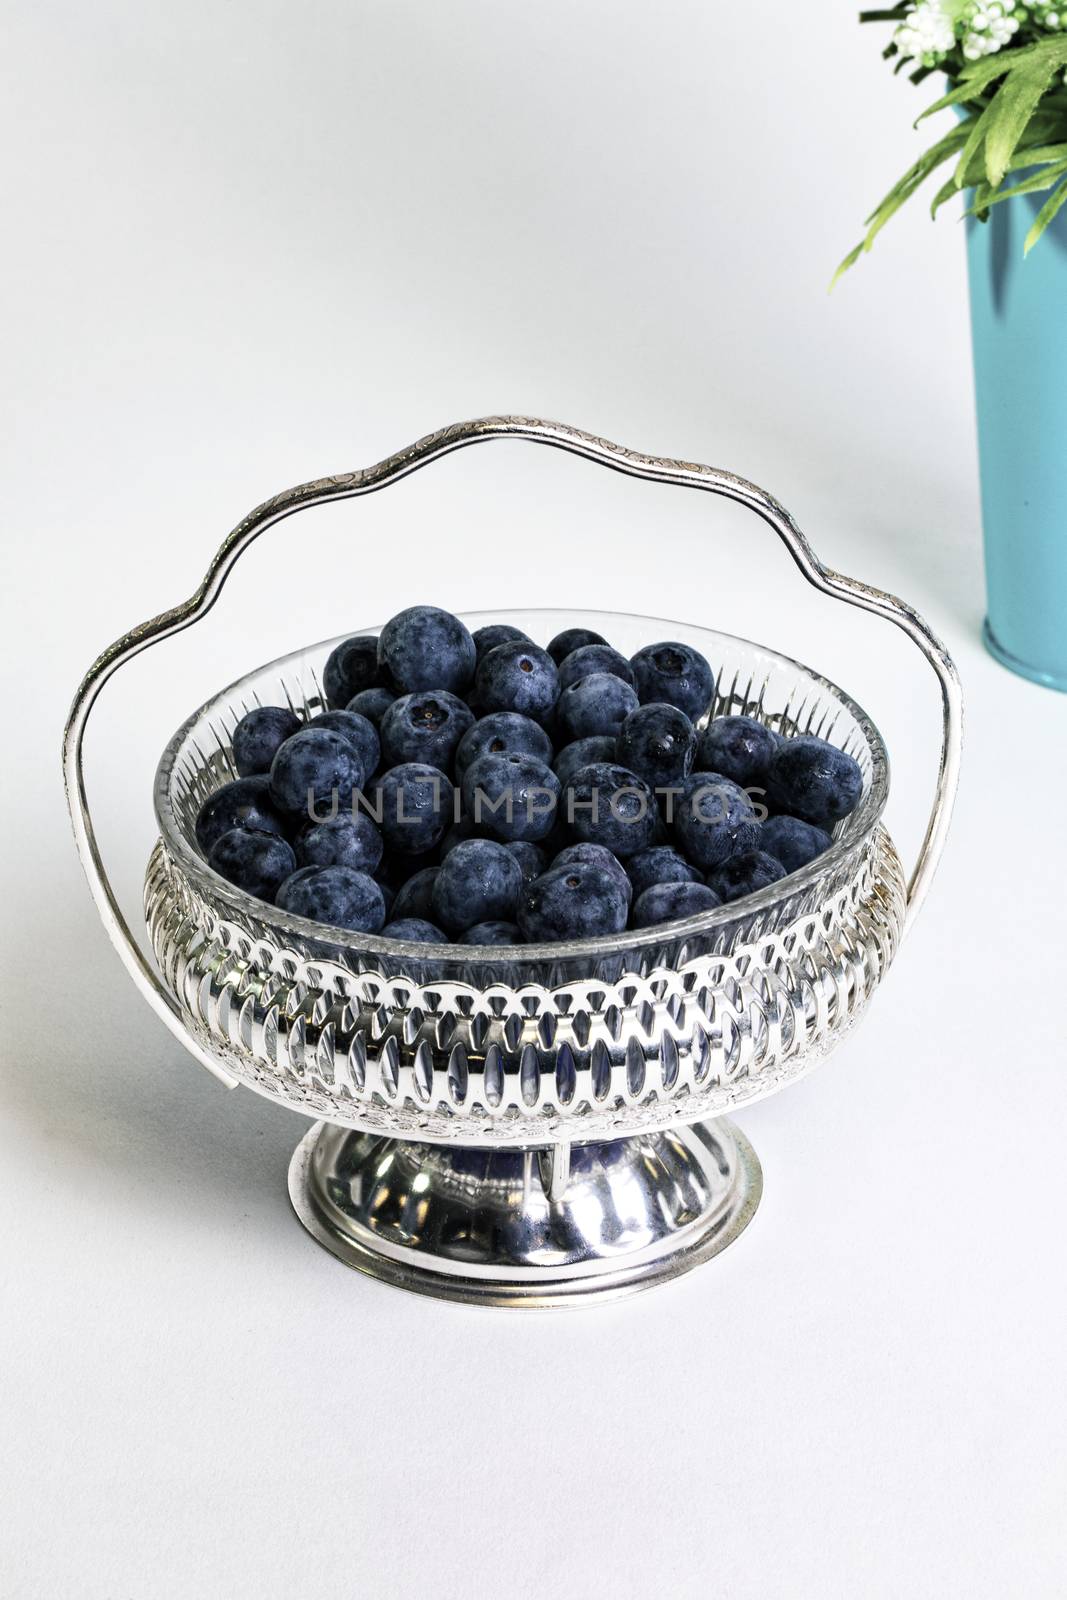 Plump Blueberries in Silver Bowl by CharlieFloyd